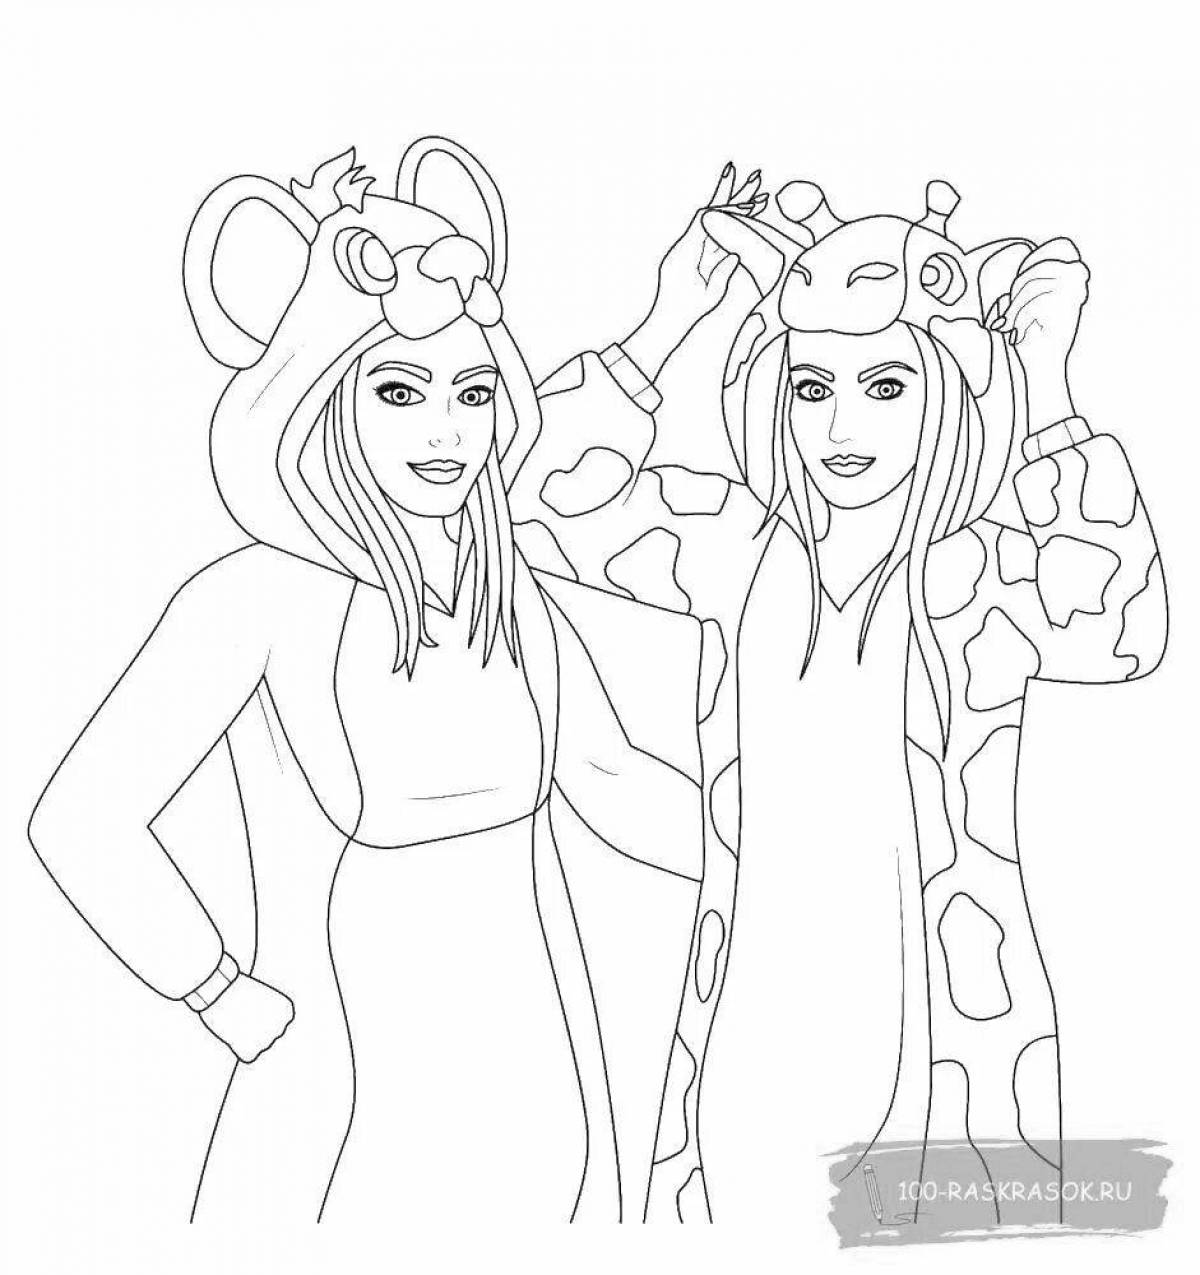 Fun coloring pages for girls and girlfriends